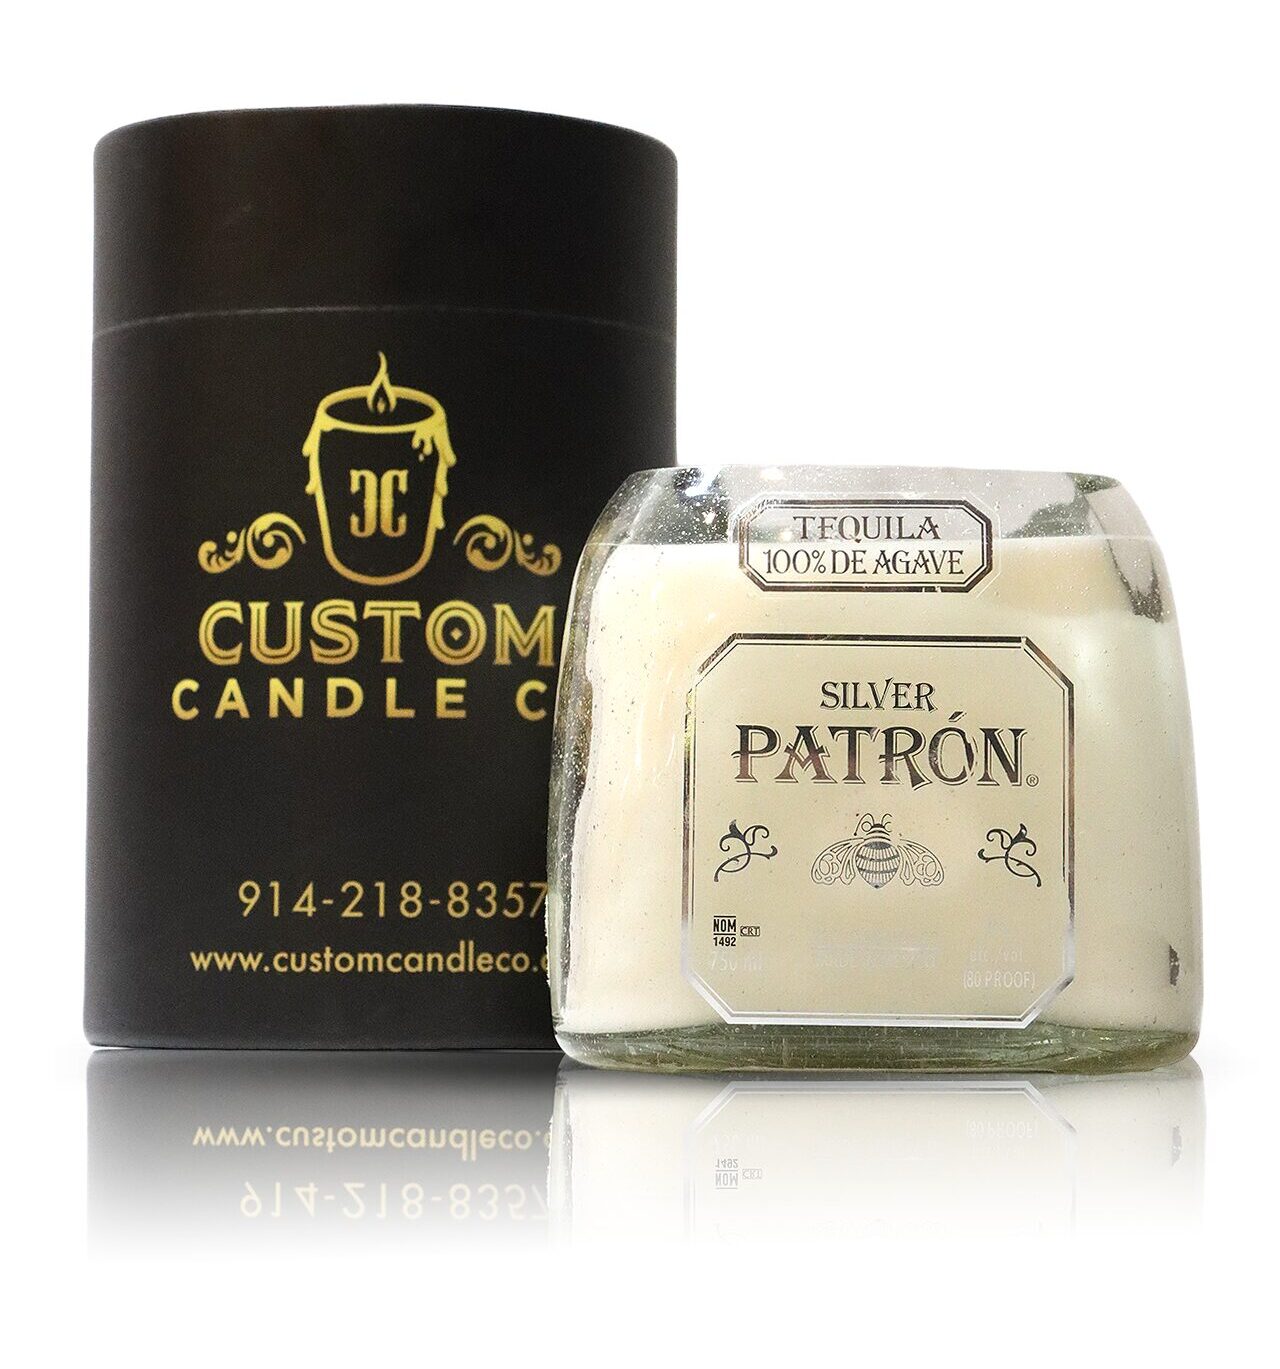 A Recycled Patron Silver Tequila Candle with the name patronon next to it.